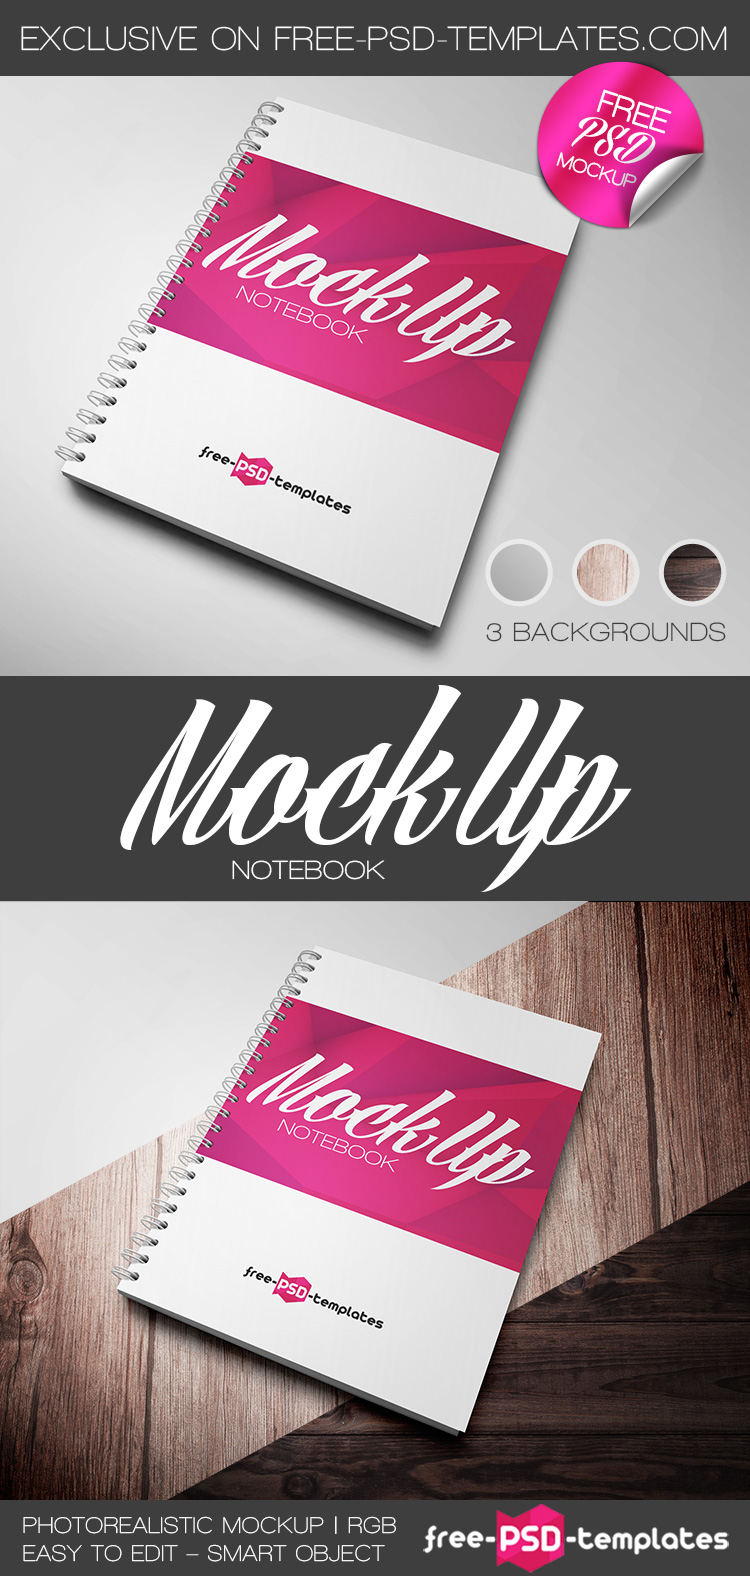 Download Free Notebook Mock-up in PSD | Free PSD Templates